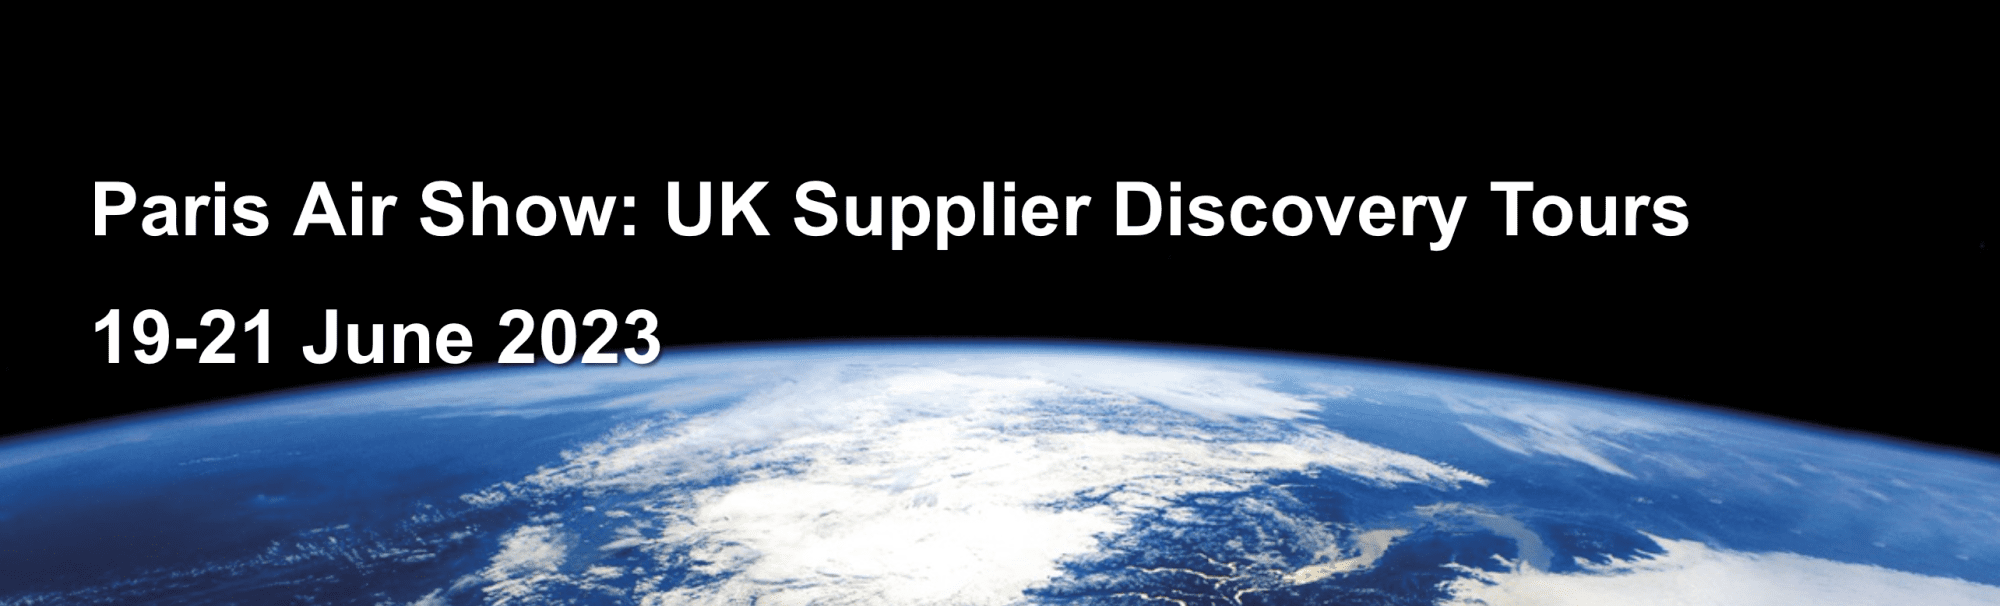 PARIS AIR SHOW: APPLY FOR UK SUPPLIER DISCOVERY TOURS – 19-21 JUNE 2023